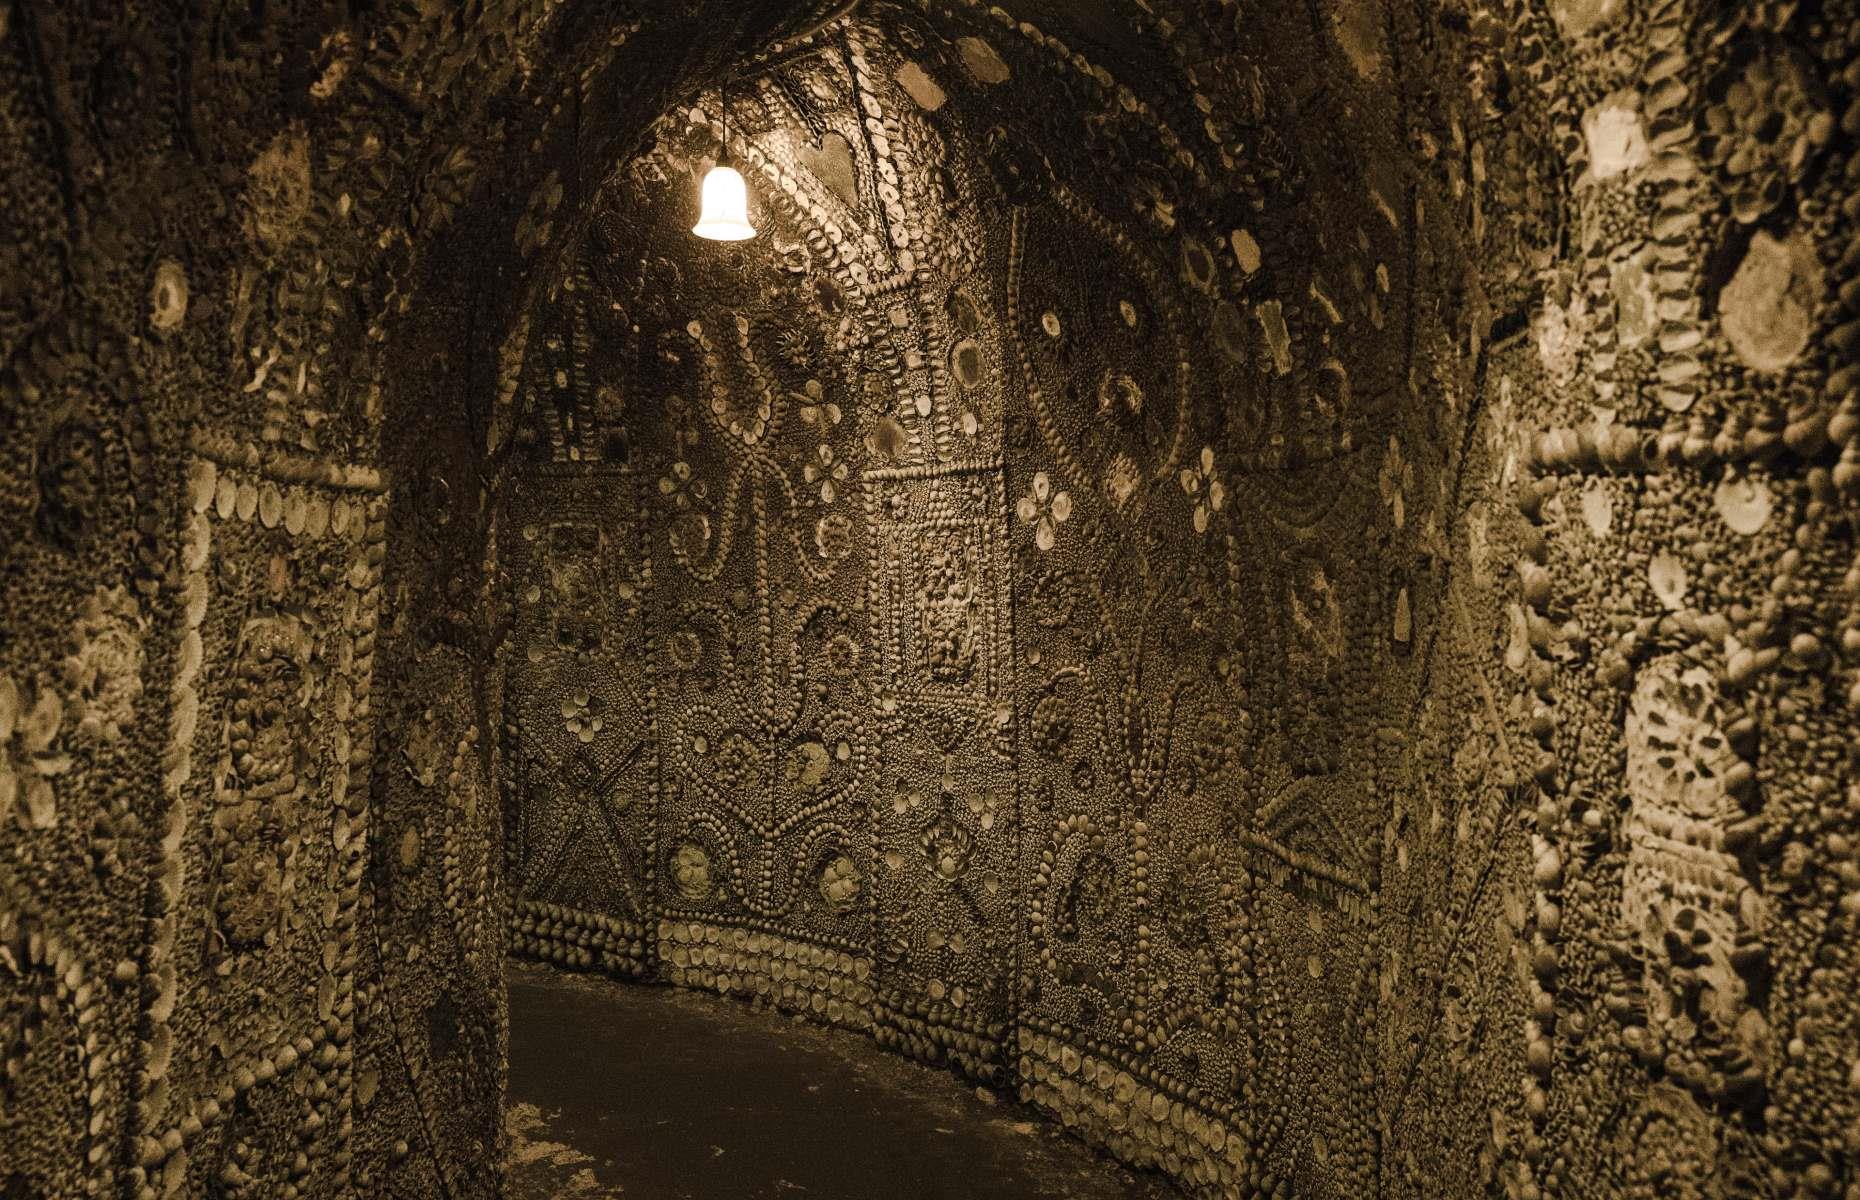 No one is really sure how Margate’s shell grotto came to be. It was discovered in 1835 by James Lovelock and his son, Joshua. They had been digging a duck pond at the time. It’s possible the grotto could have been the Victorian folly of a rich man, but some think it’s a smuggler’s cove.